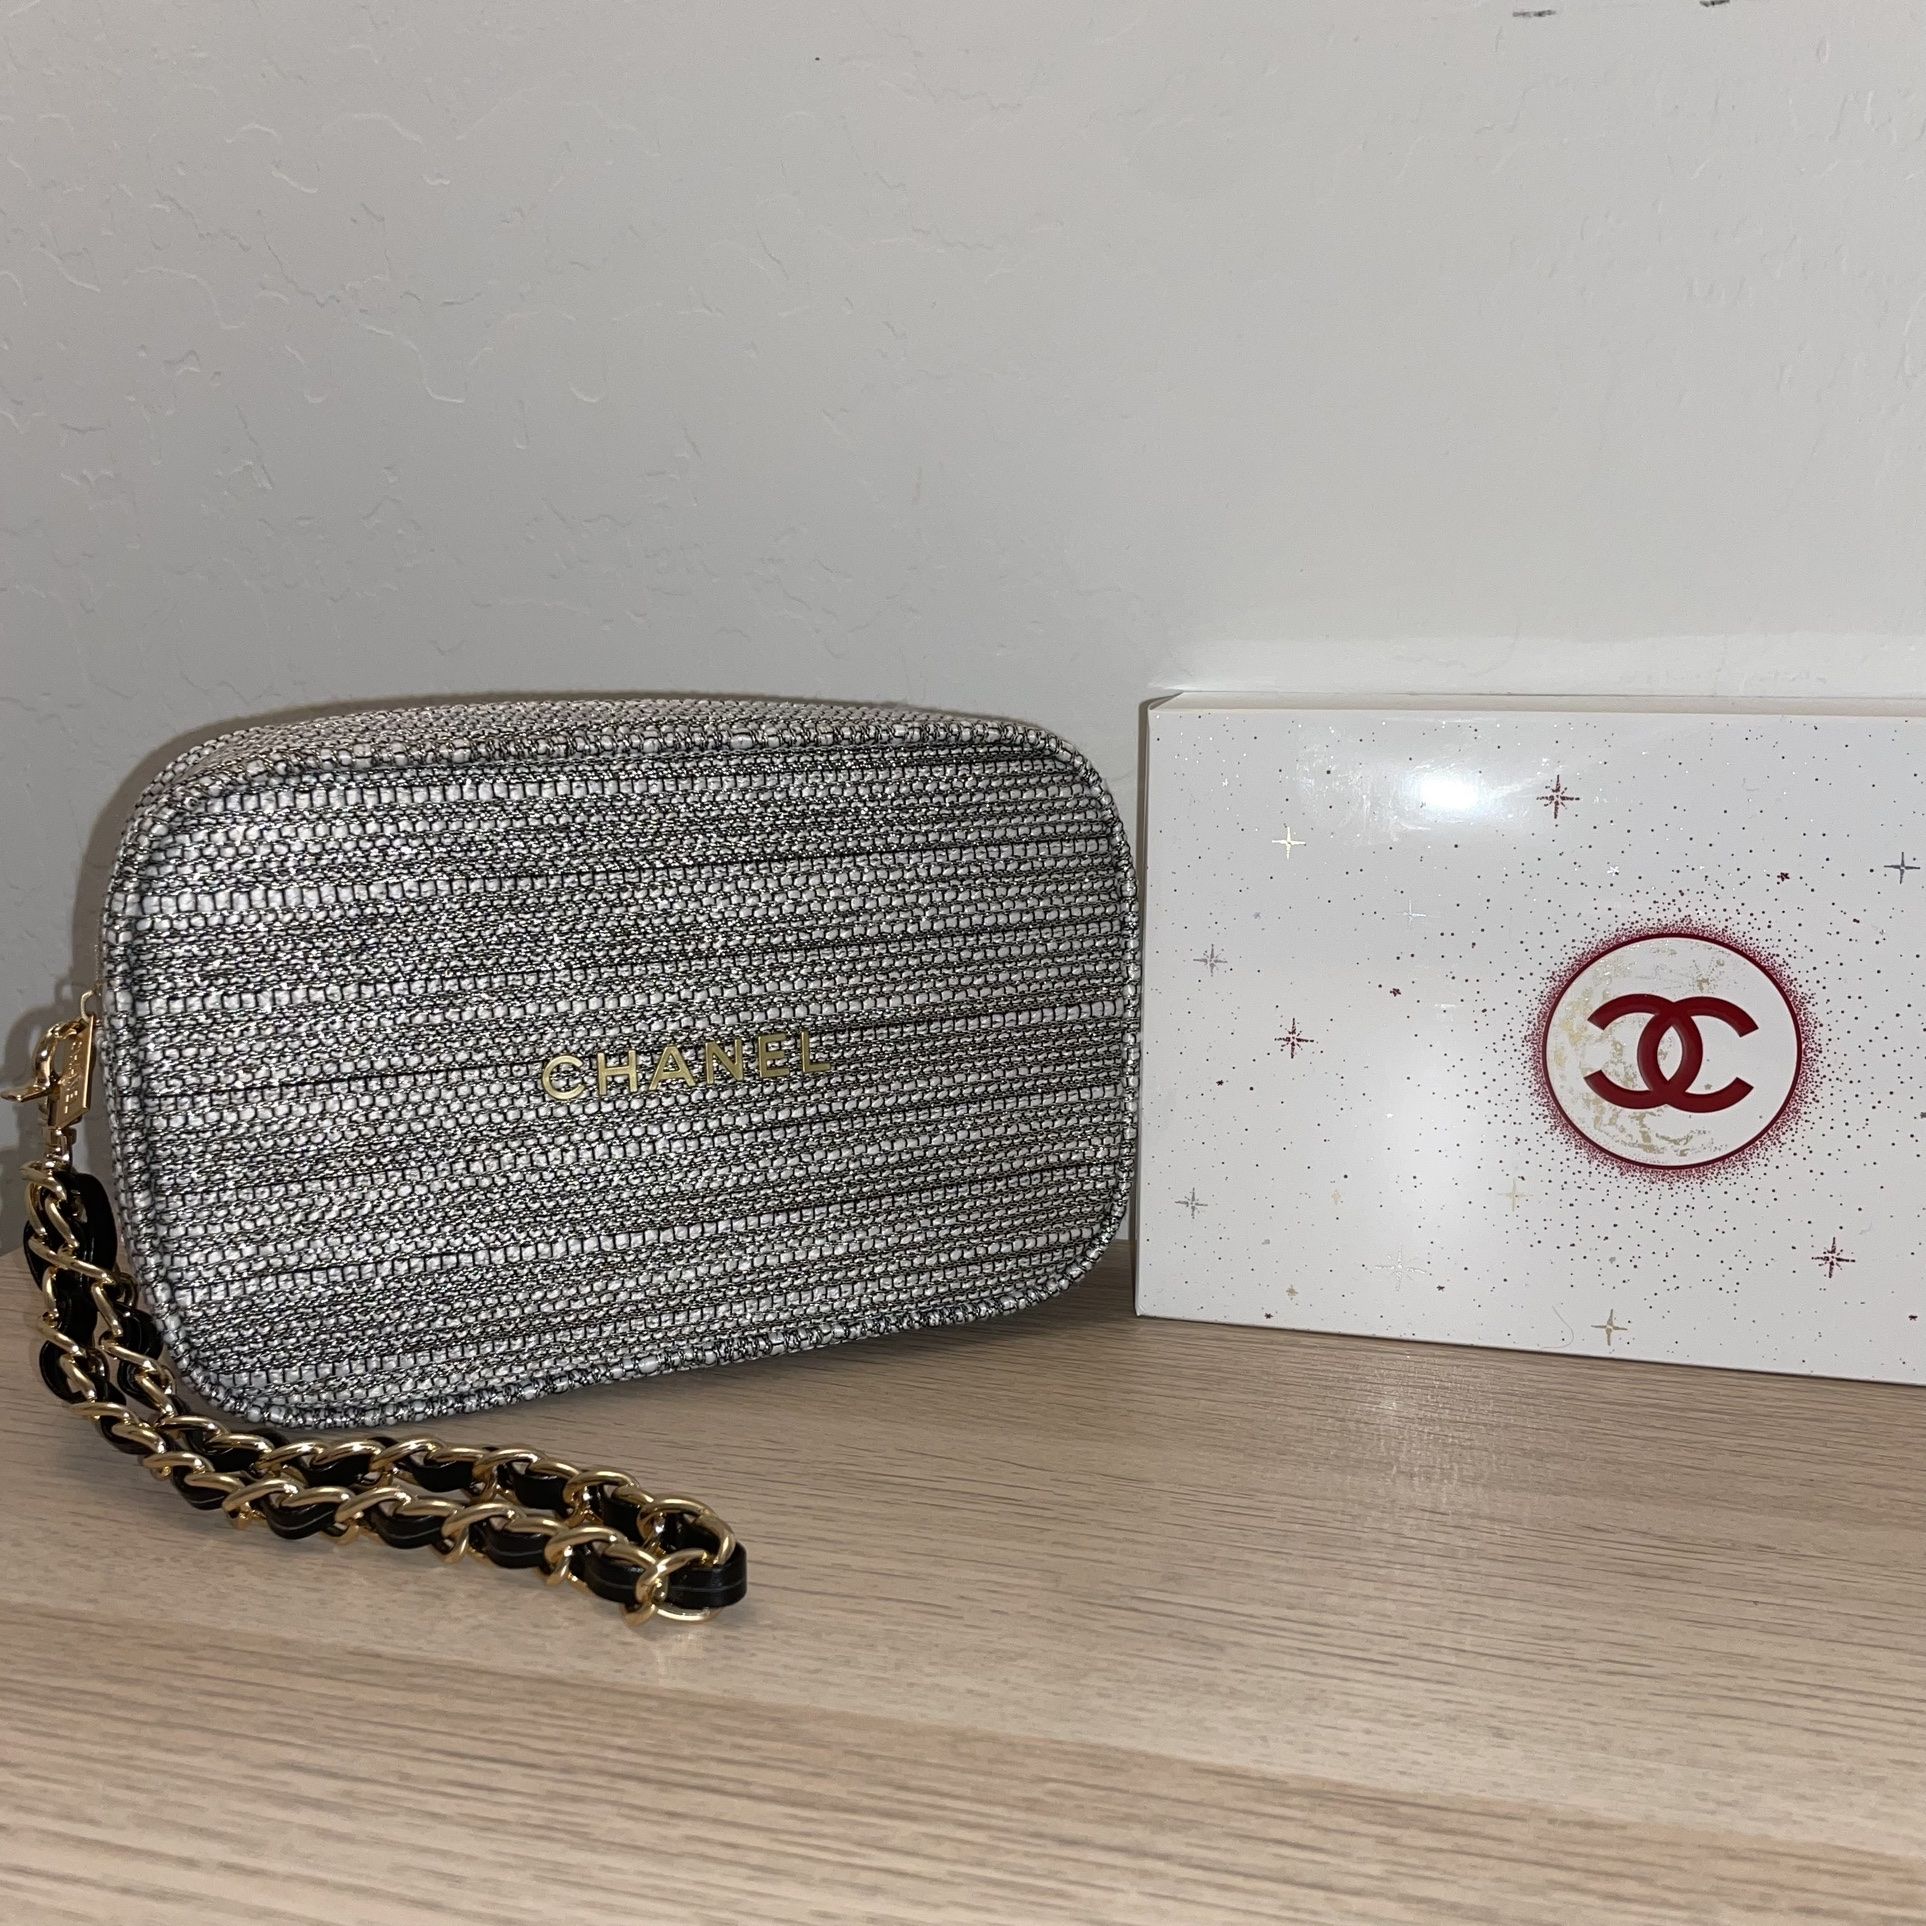 Chanel Makeup Bag With Wristlet Strap for Sale in Henderson, NV